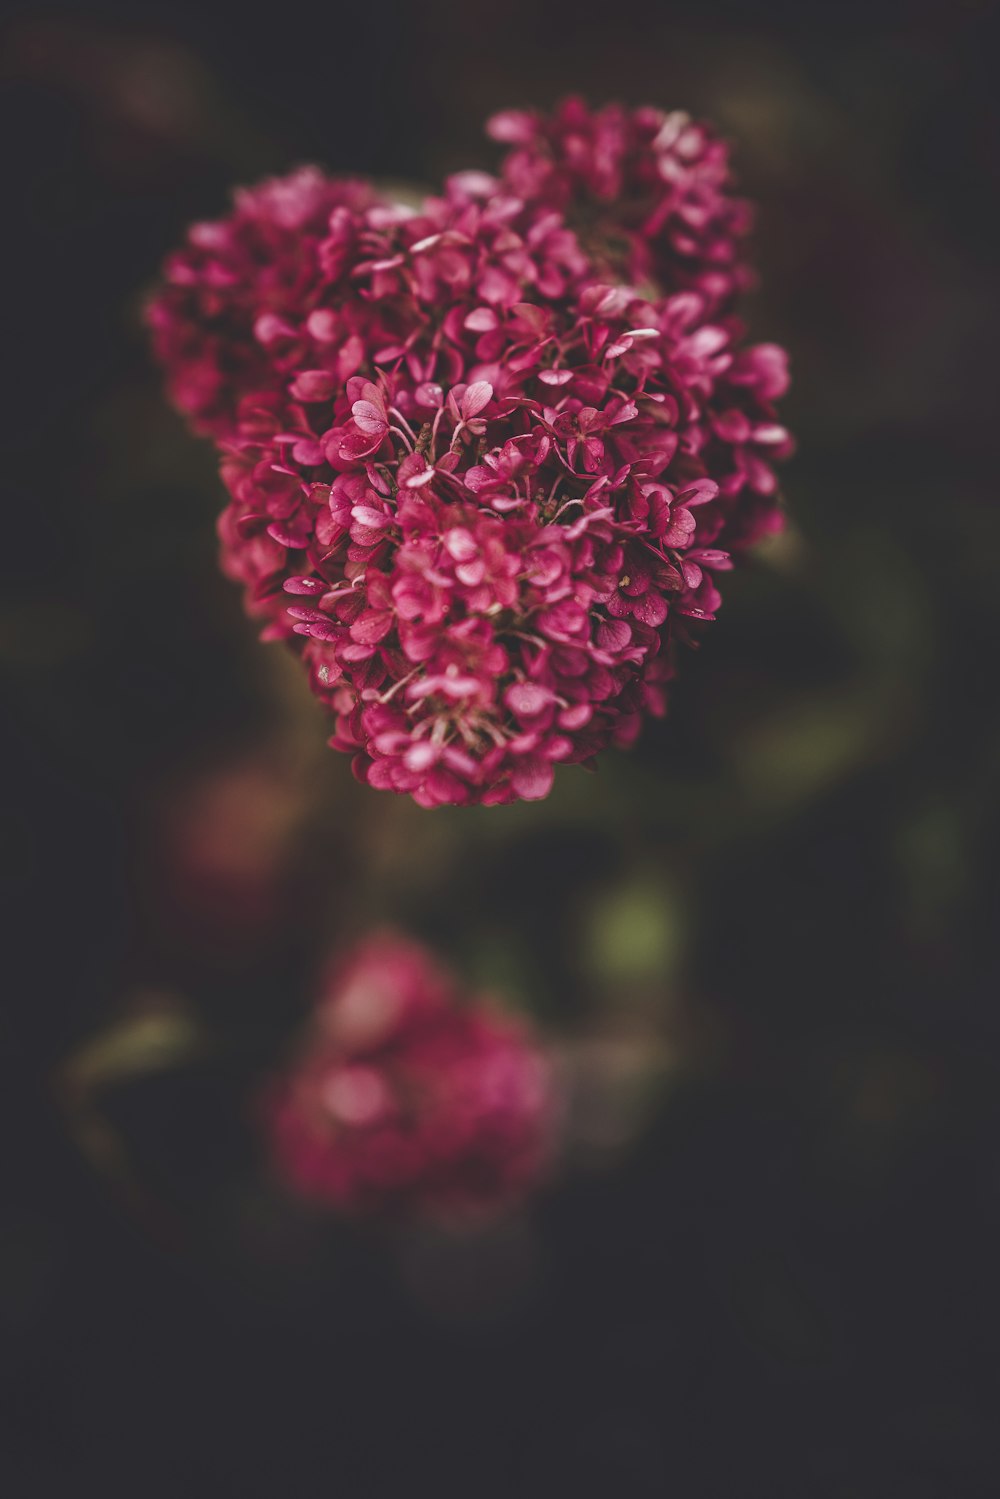 selective focus photography of pink petaled flowers